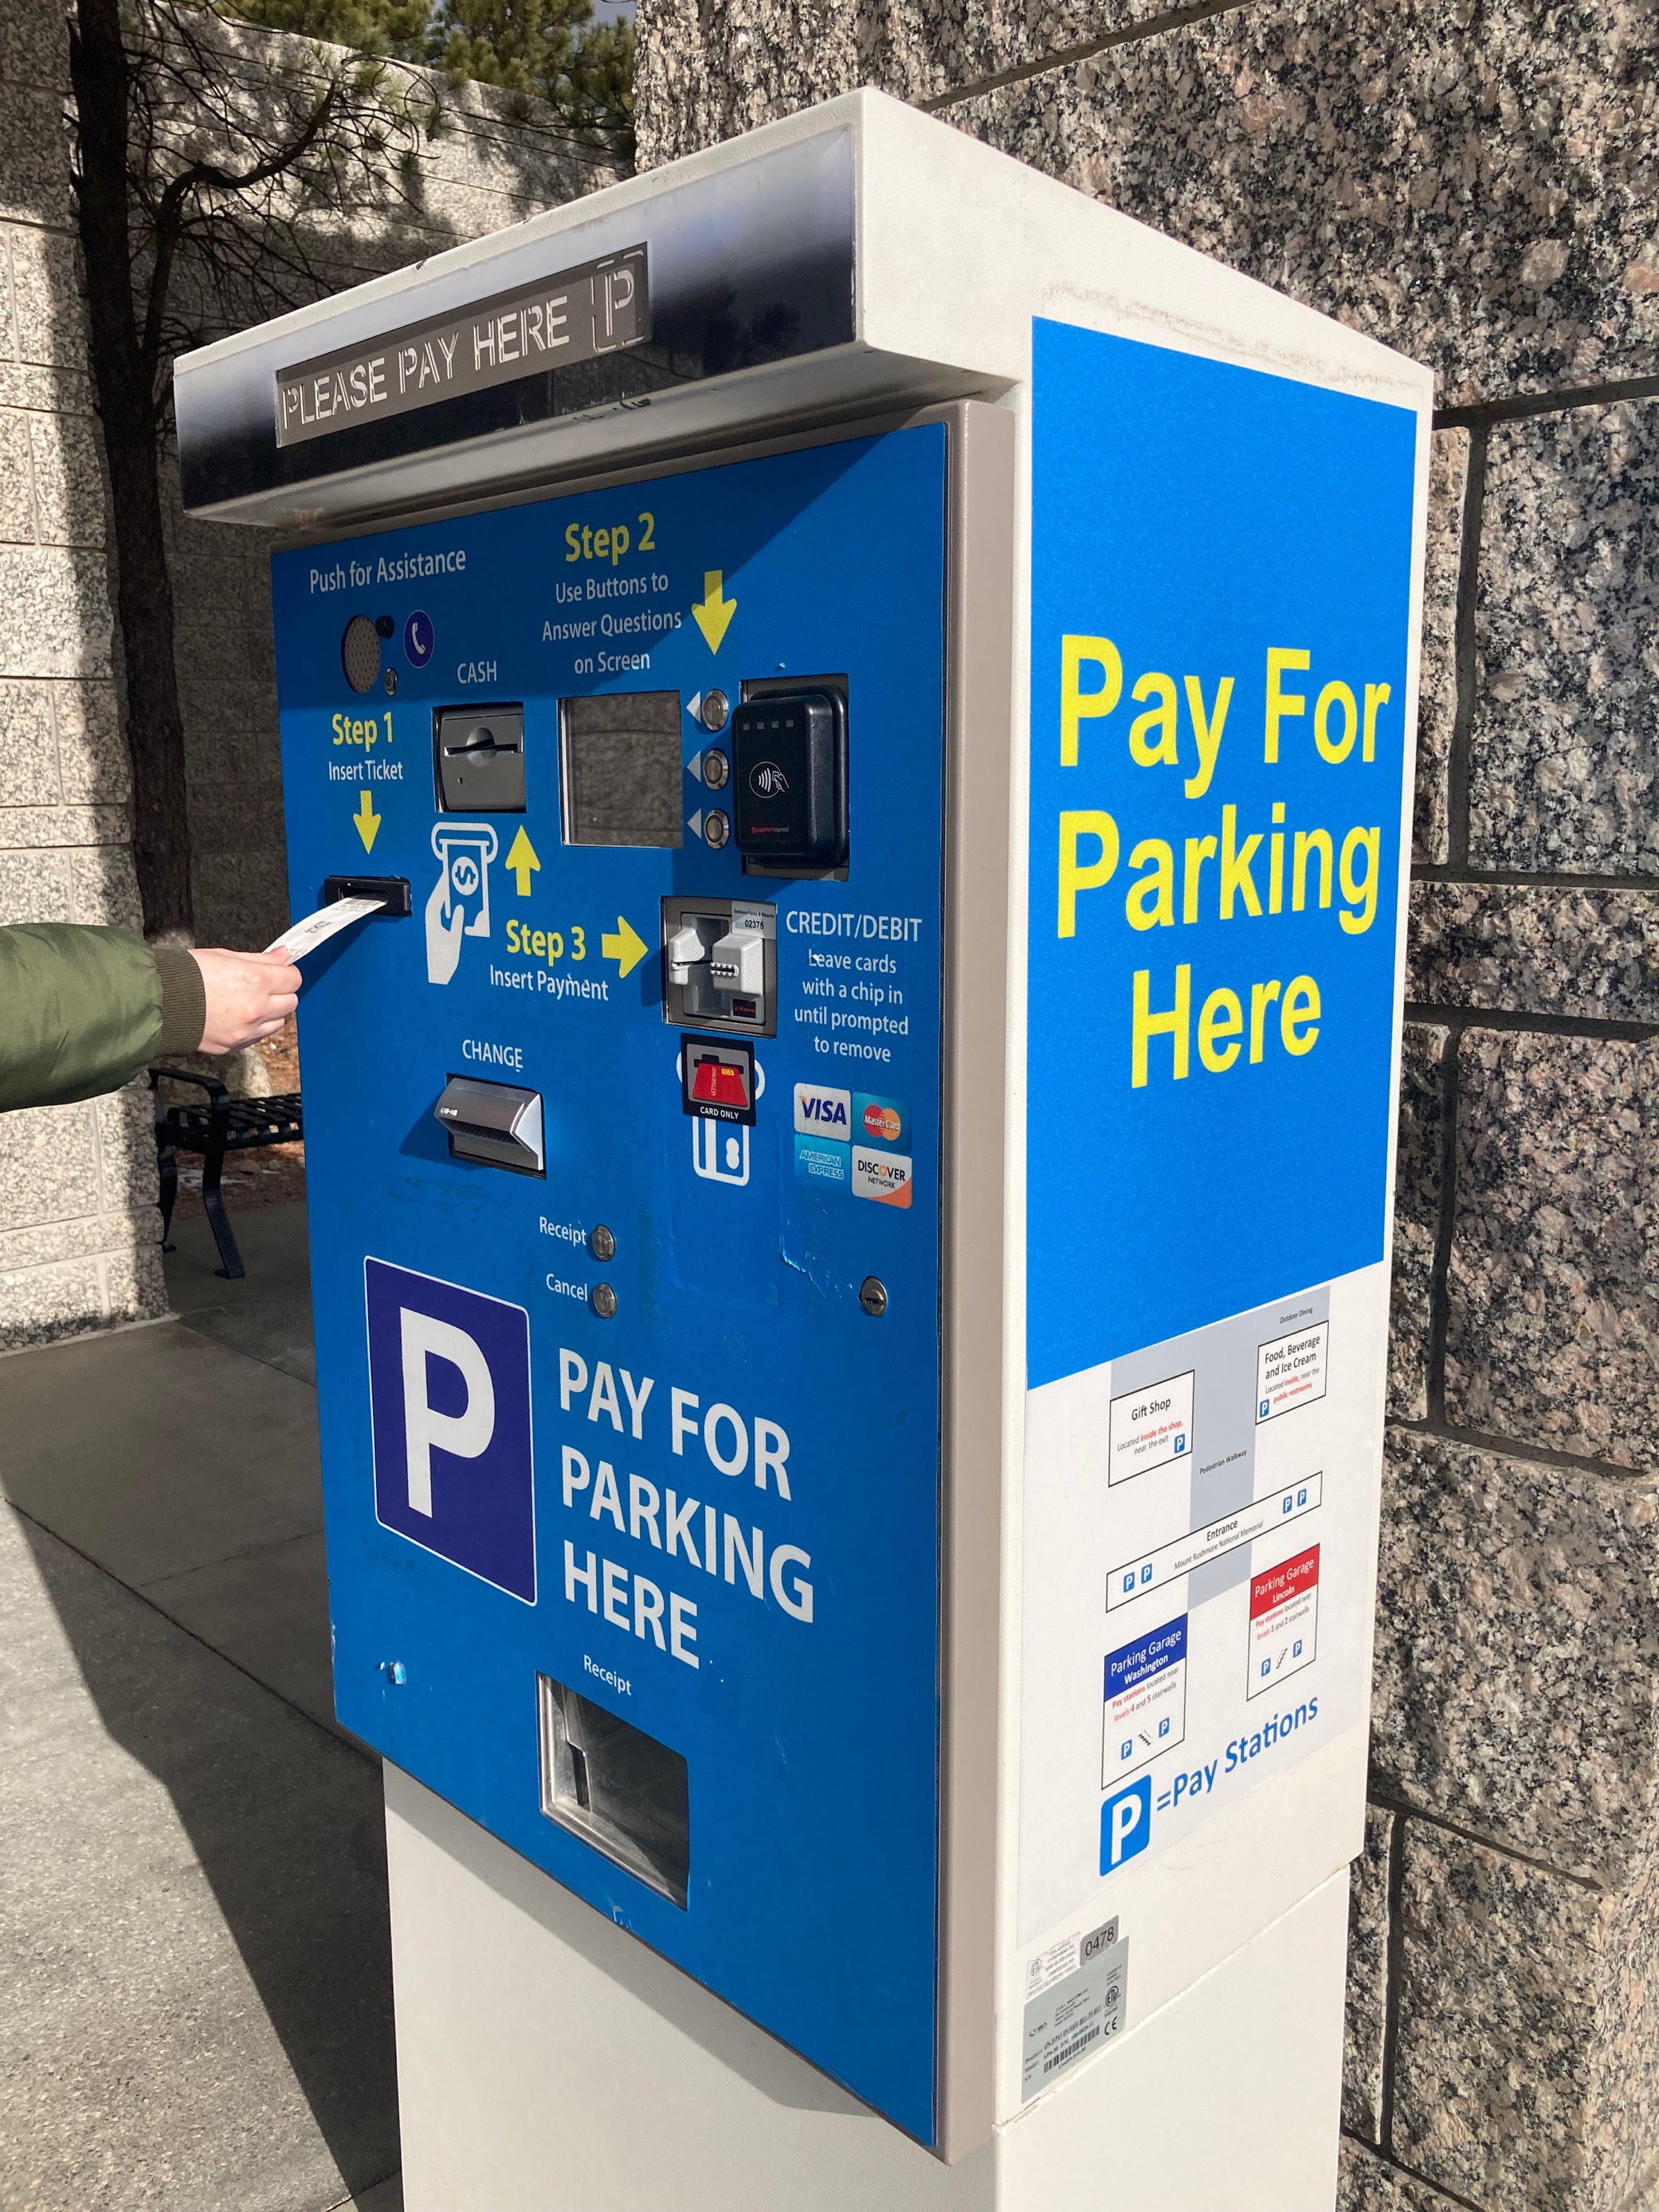 Parking pay-on-foot station